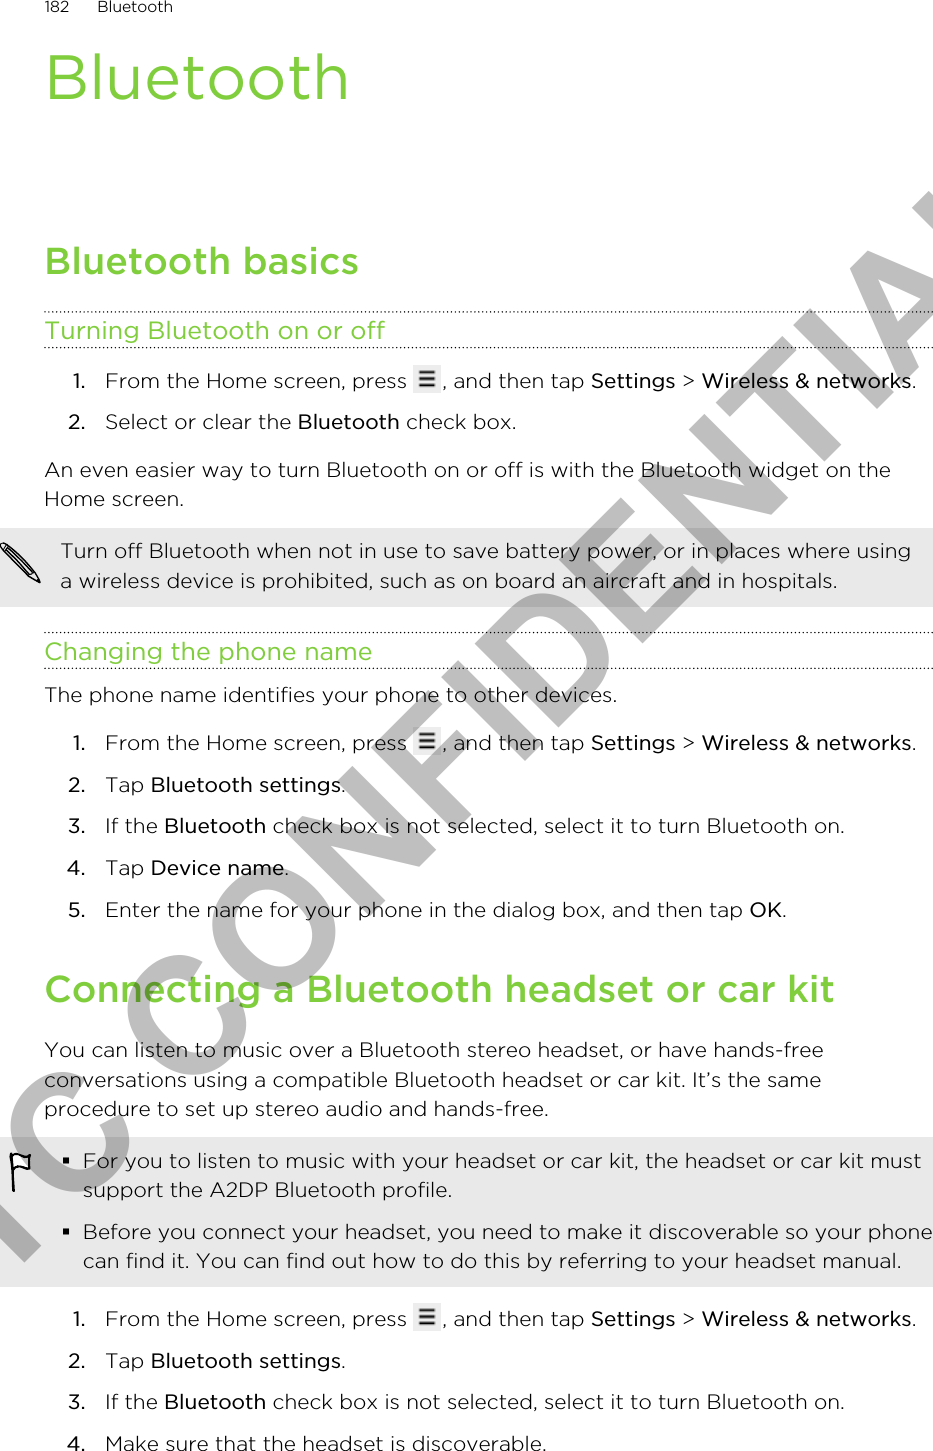 BluetoothBluetooth basicsTurning Bluetooth on or off1. From the Home screen, press  , and then tap Settings &gt; Wireless &amp; networks.2. Select or clear the Bluetooth check box.An even easier way to turn Bluetooth on or off is with the Bluetooth widget on theHome screen.Turn off Bluetooth when not in use to save battery power, or in places where usinga wireless device is prohibited, such as on board an aircraft and in hospitals.Changing the phone nameThe phone name identifies your phone to other devices.1. From the Home screen, press  , and then tap Settings &gt; Wireless &amp; networks.2. Tap Bluetooth settings.3. If the Bluetooth check box is not selected, select it to turn Bluetooth on.4. Tap Device name.5. Enter the name for your phone in the dialog box, and then tap OK.Connecting a Bluetooth headset or car kitYou can listen to music over a Bluetooth stereo headset, or have hands-freeconversations using a compatible Bluetooth headset or car kit. It’s the sameprocedure to set up stereo audio and hands-free.§For you to listen to music with your headset or car kit, the headset or car kit mustsupport the A2DP Bluetooth profile.§Before you connect your headset, you need to make it discoverable so your phonecan find it. You can find out how to do this by referring to your headset manual.1. From the Home screen, press  , and then tap Settings &gt; Wireless &amp; networks.2. Tap Bluetooth settings.3. If the Bluetooth check box is not selected, select it to turn Bluetooth on.4. Make sure that the headset is discoverable.182 BluetoothHTC CONFIDENTIAL